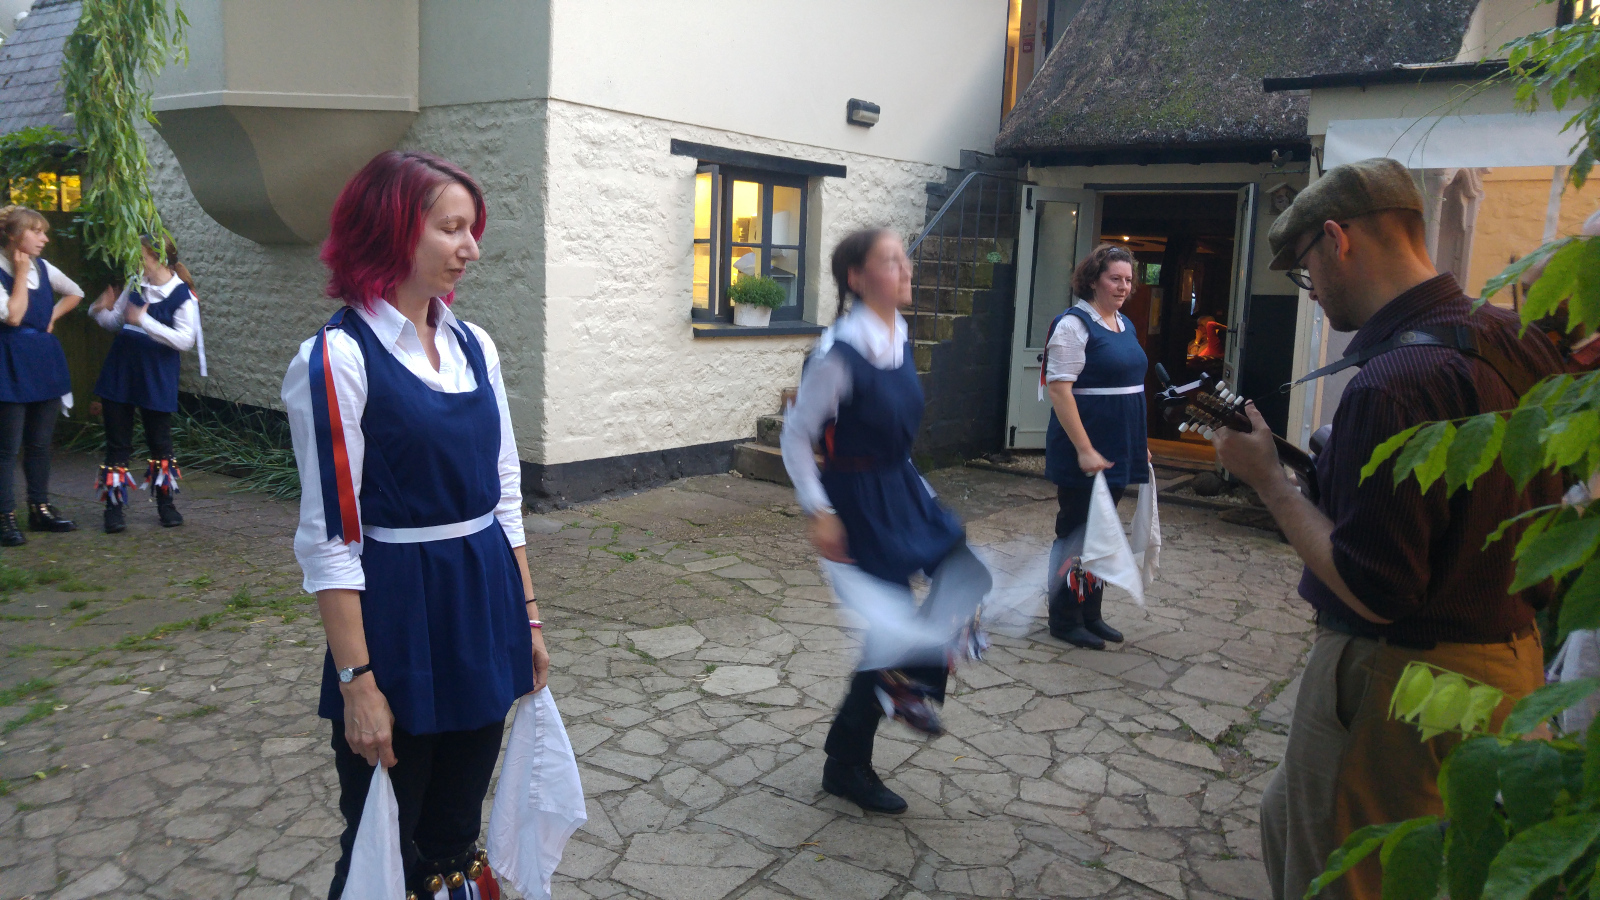 Summertown Morris at the Perch in Binsey.